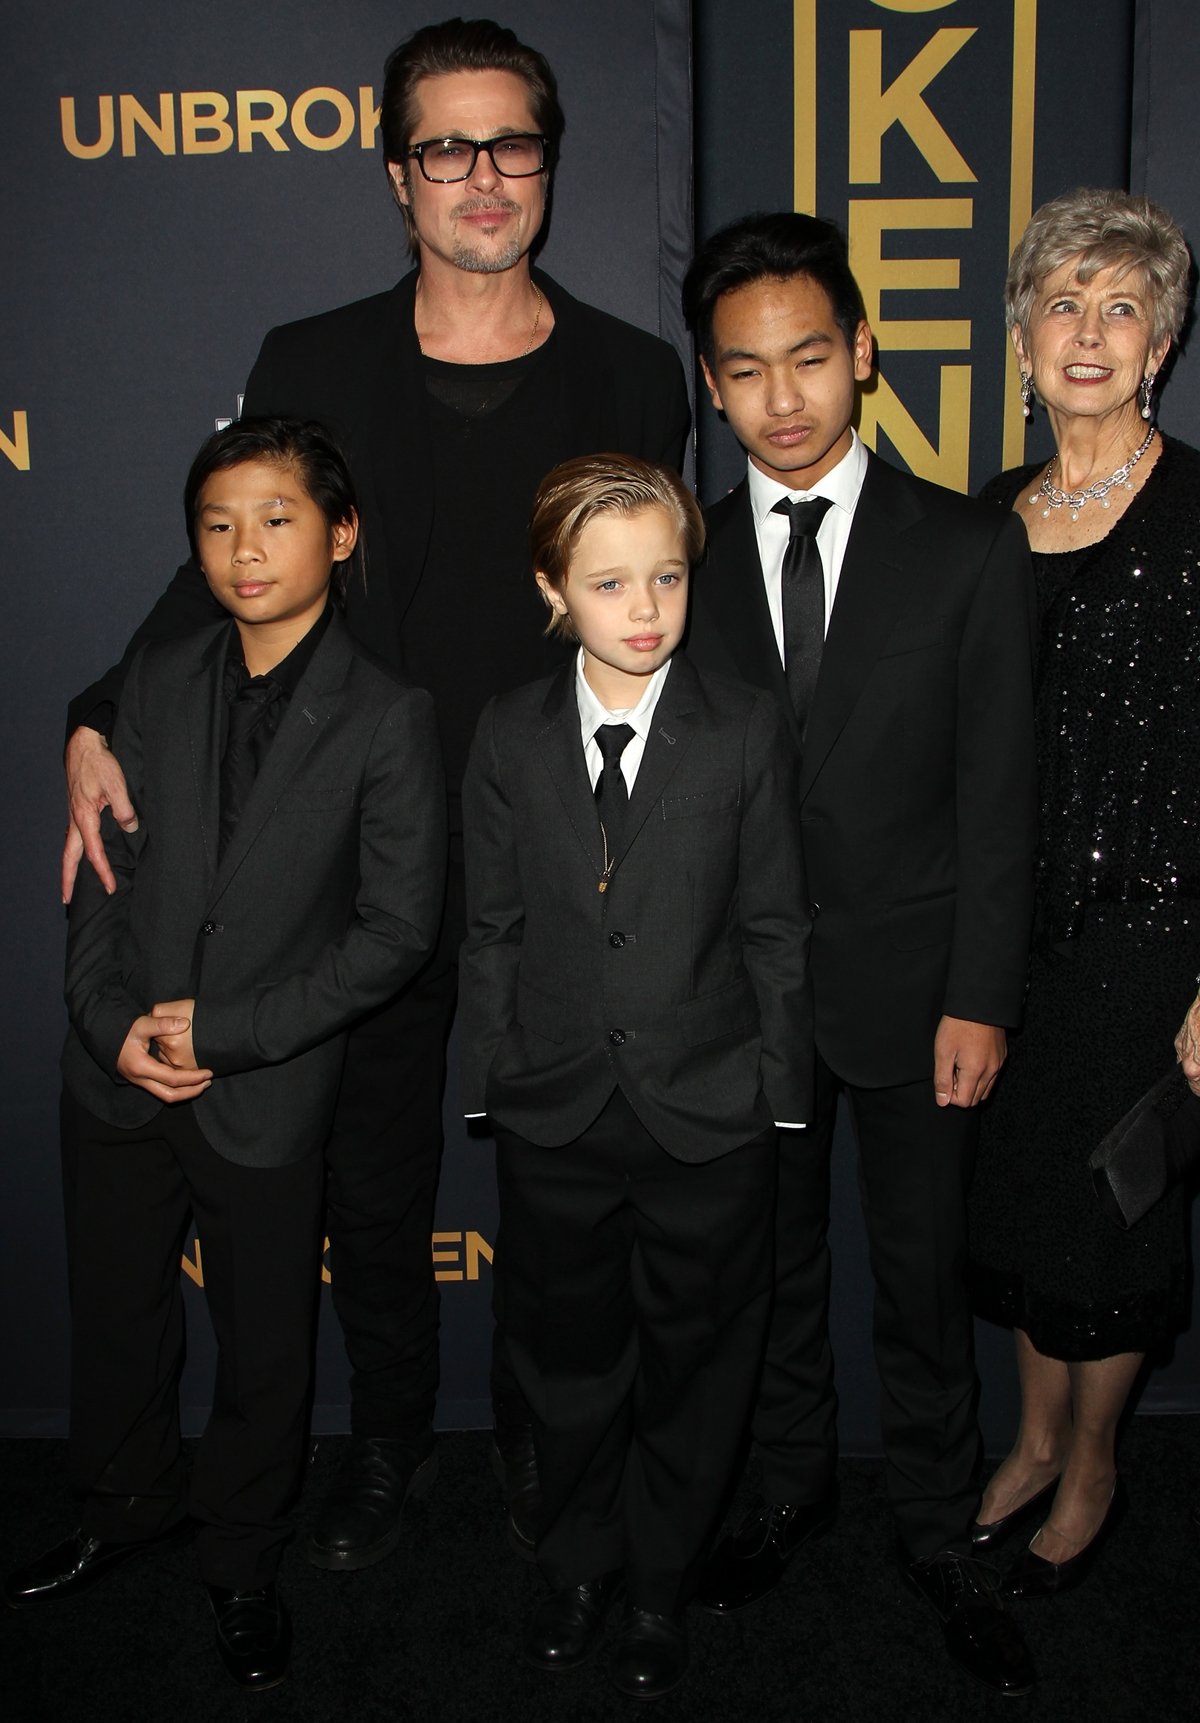 Actor Brad Pitt posing with his children Pax Jolie-Pitt, Shiloh Jolie-Pitt, and Maddox Jolie-Pitt and his mother Jane Etta Pitt at the premiere of "Unbroken"